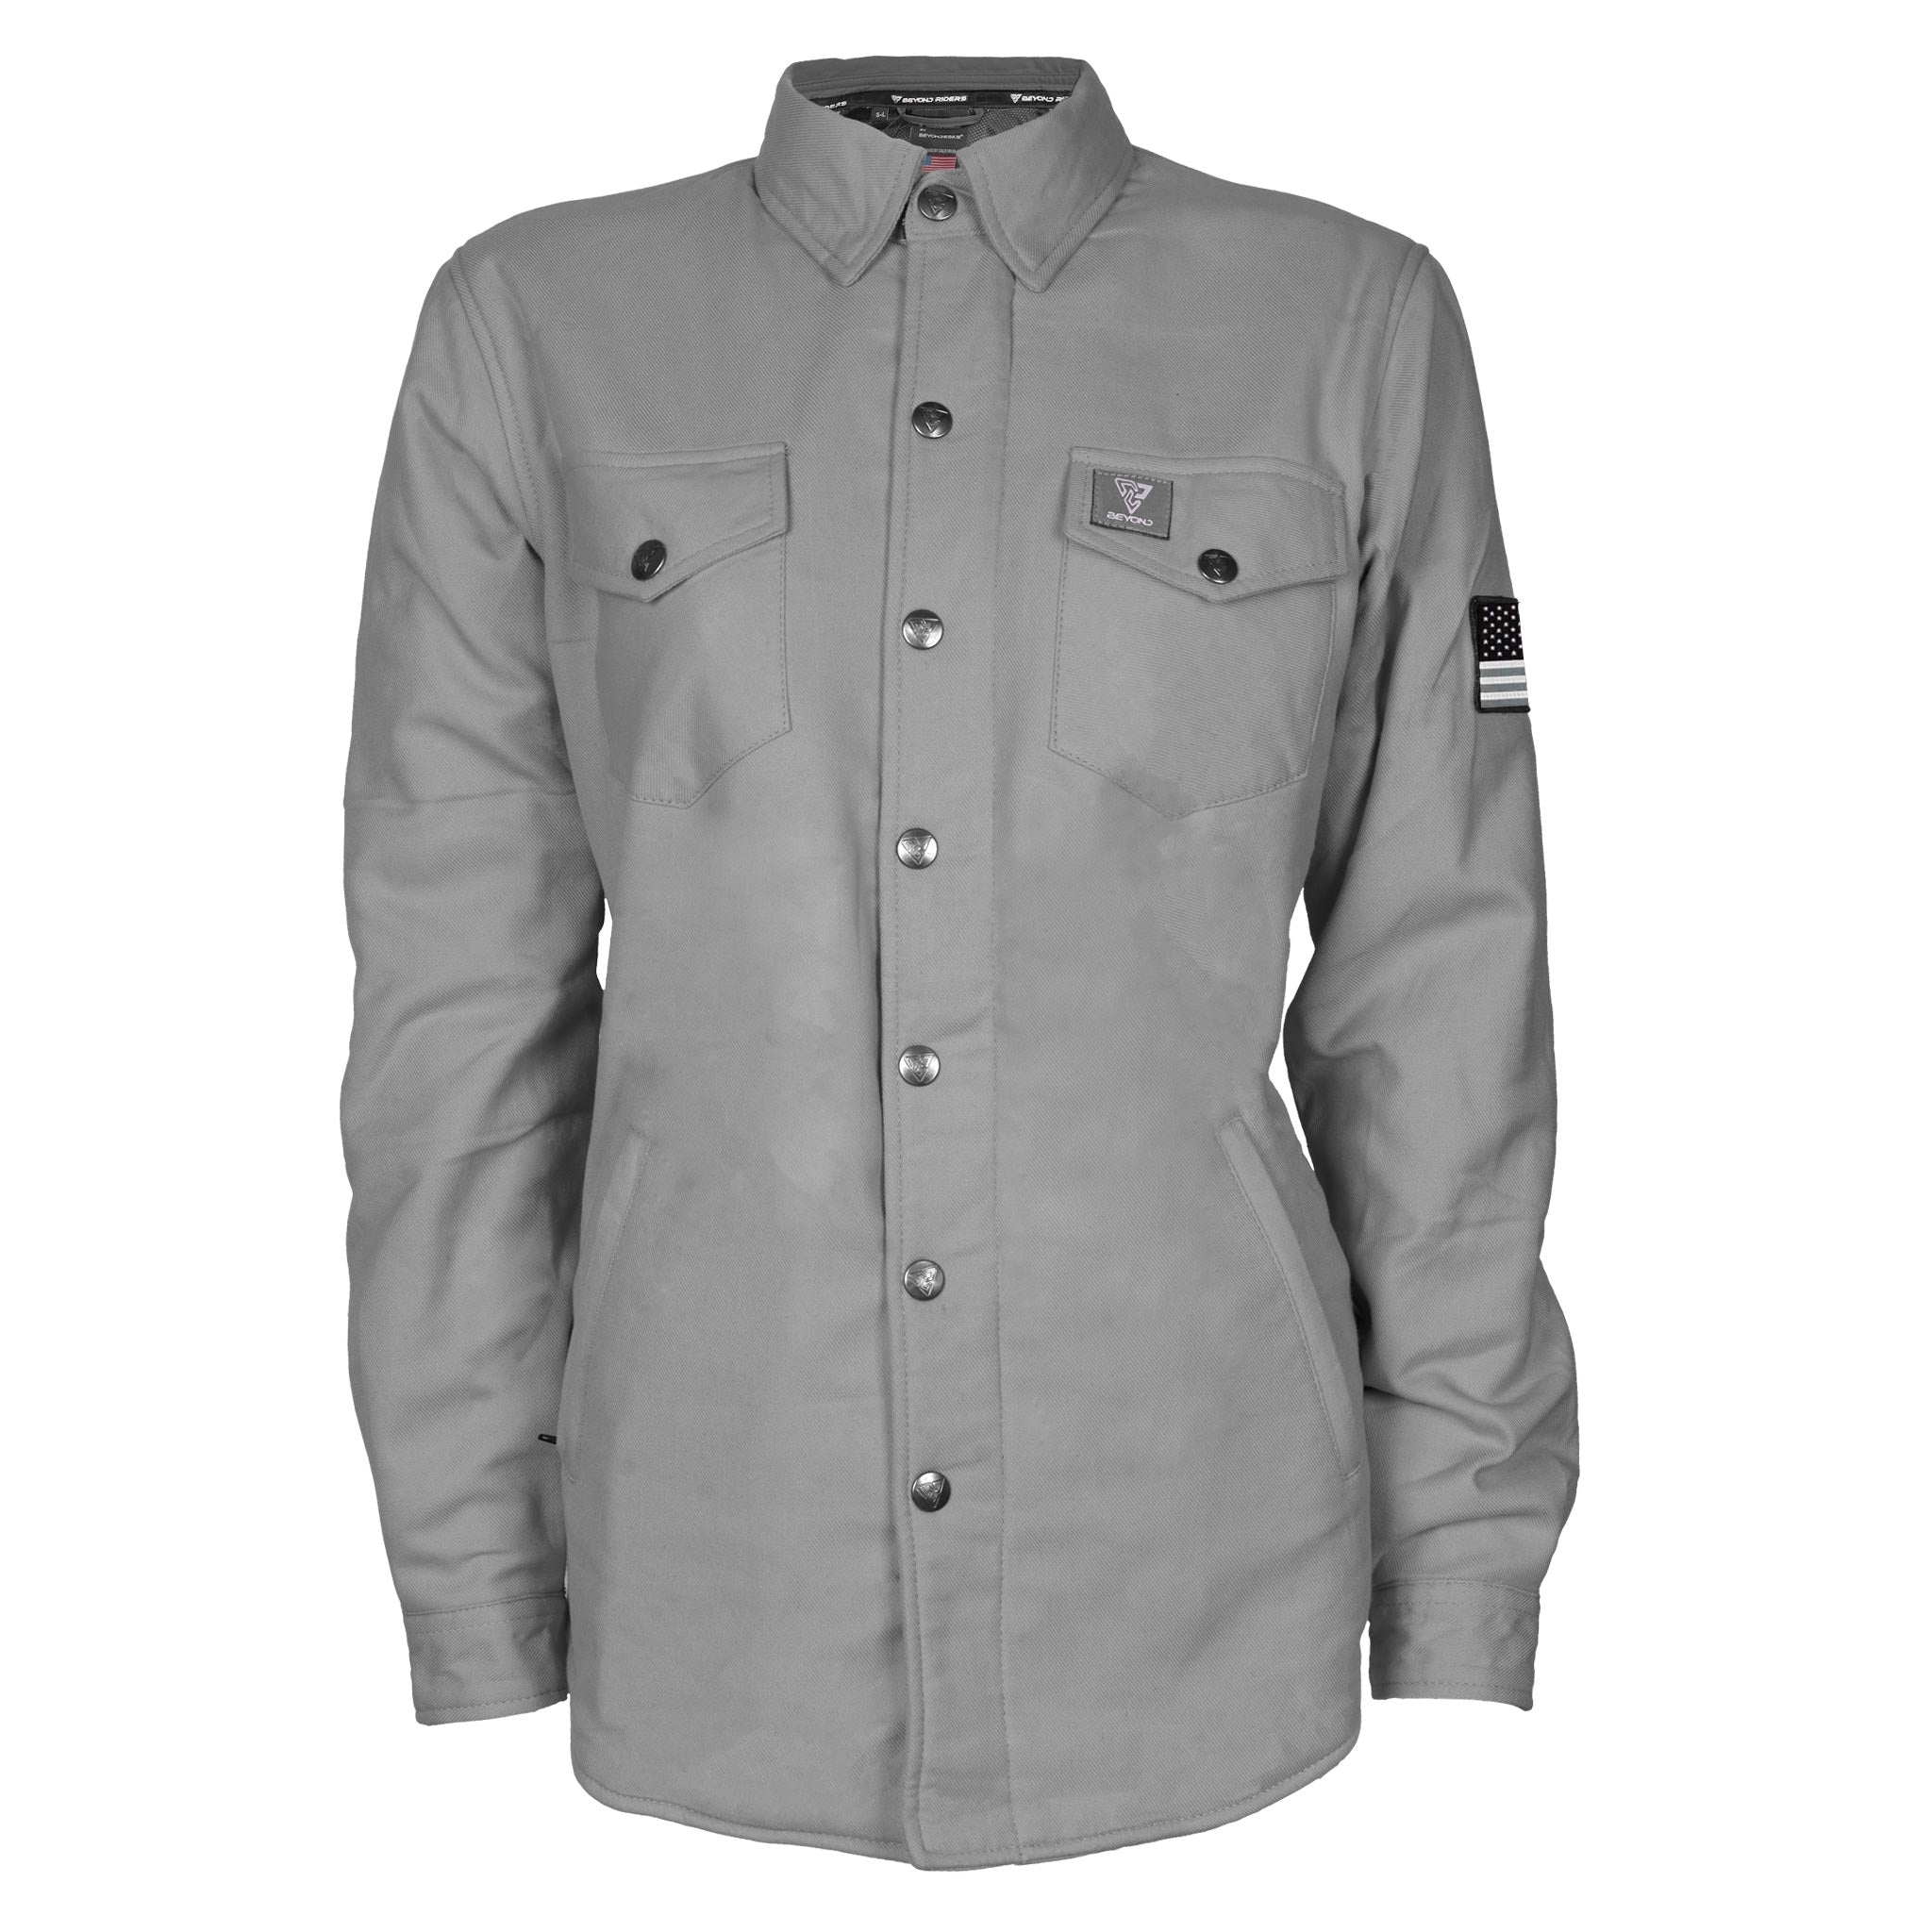 Protective Flannel Shirt for Women - Grey Solid